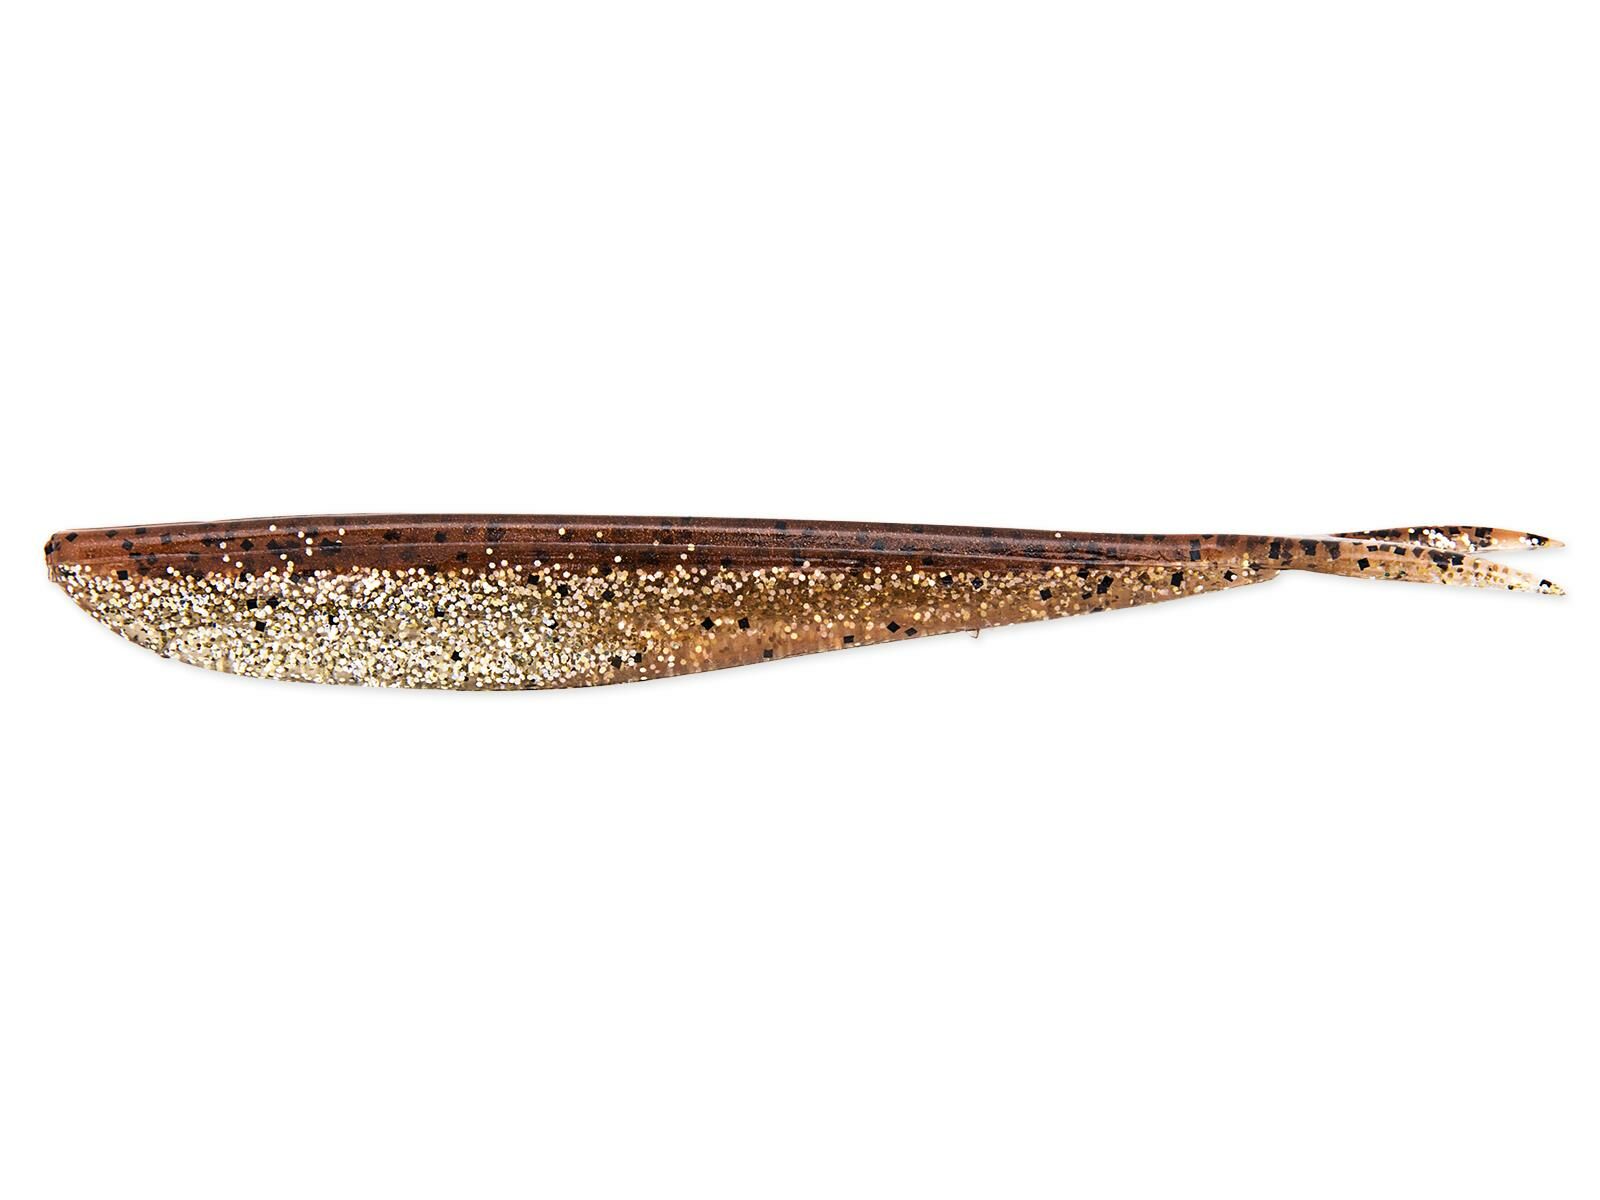 4" Fin-S Fish - Rootbeer Shiner